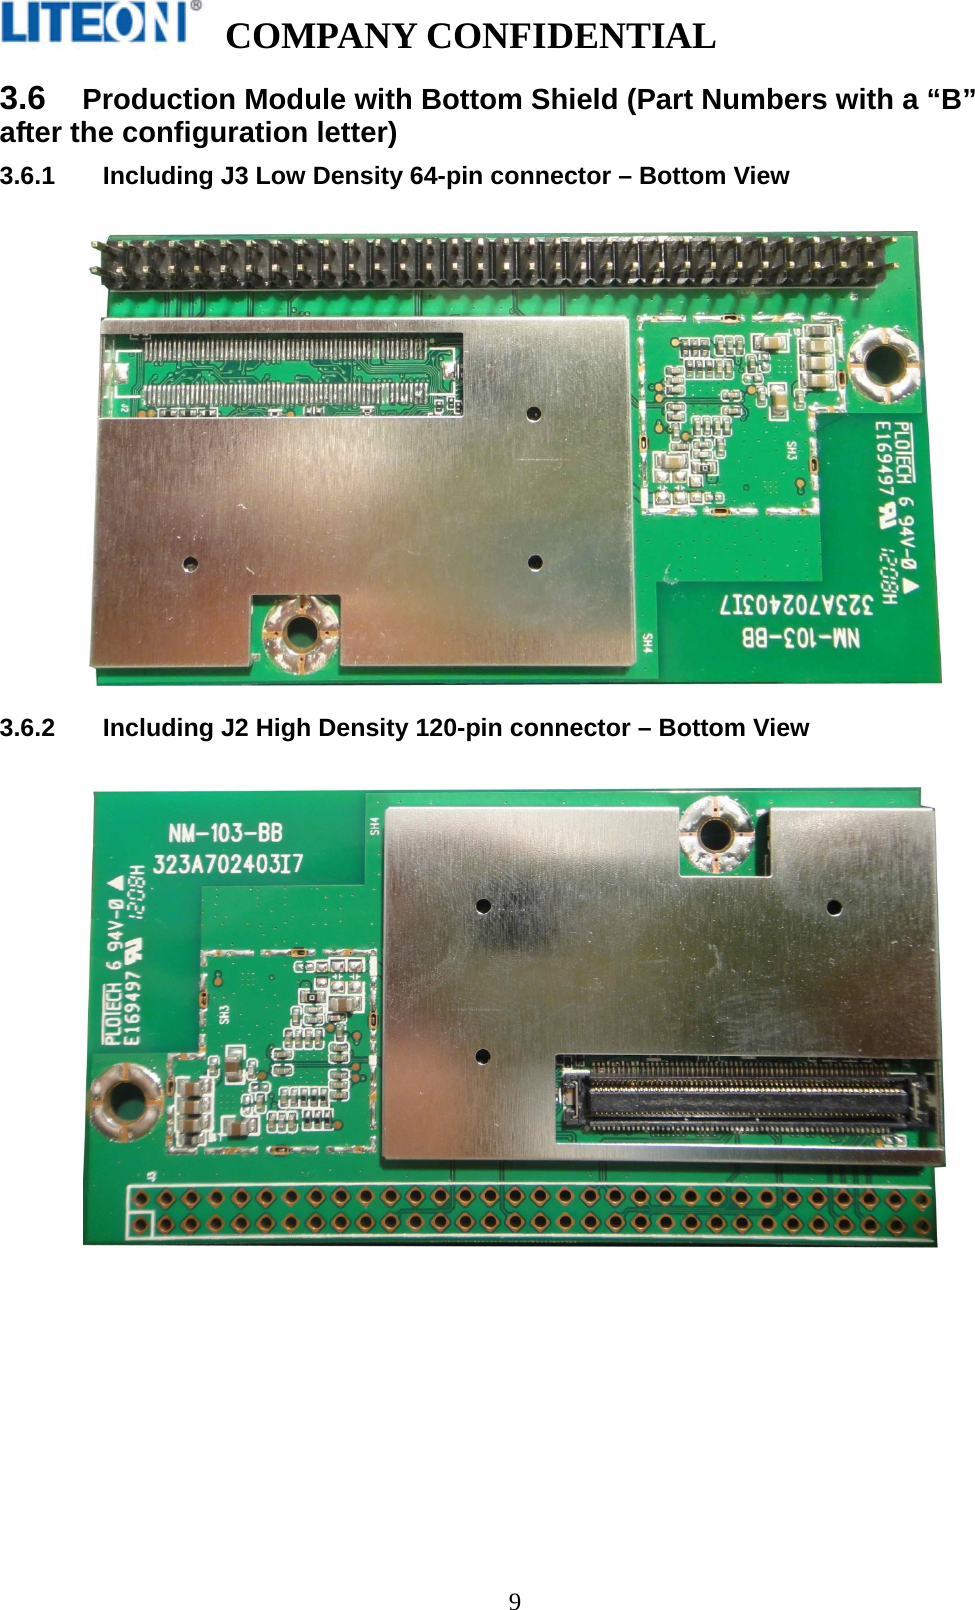   COMPANY CONFIDENTIAL    93.6  Production Module with Bottom Shield (Part Numbers with a “B” after the configuration letter) 3.6.1  Including J3 Low Density 64-pin connector – Bottom View    3.6.2  Including J2 High Density 120-pin connector – Bottom View    